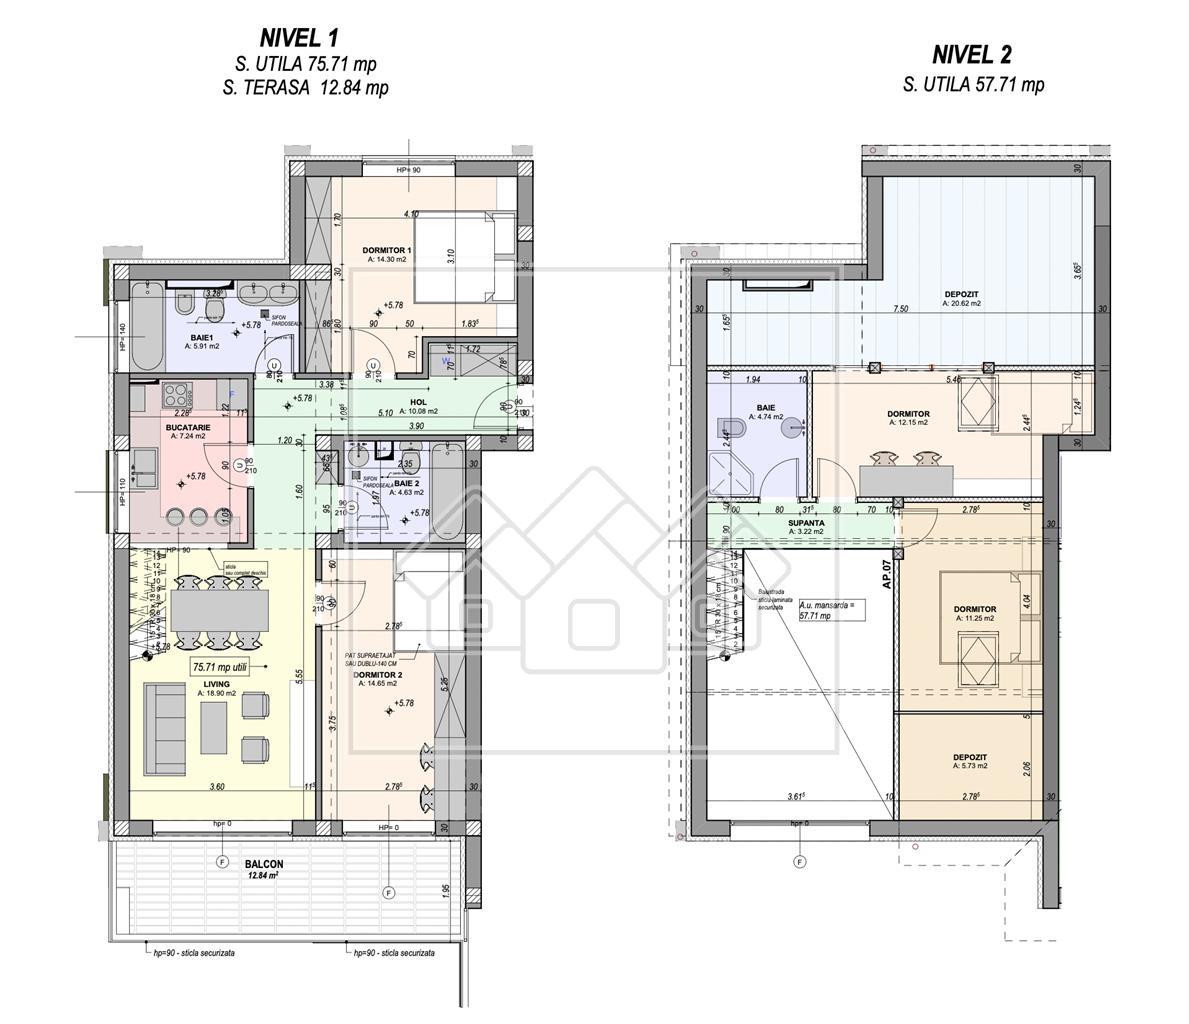 Penthouse on 2 levels - special concept, 133.42 sq m useful